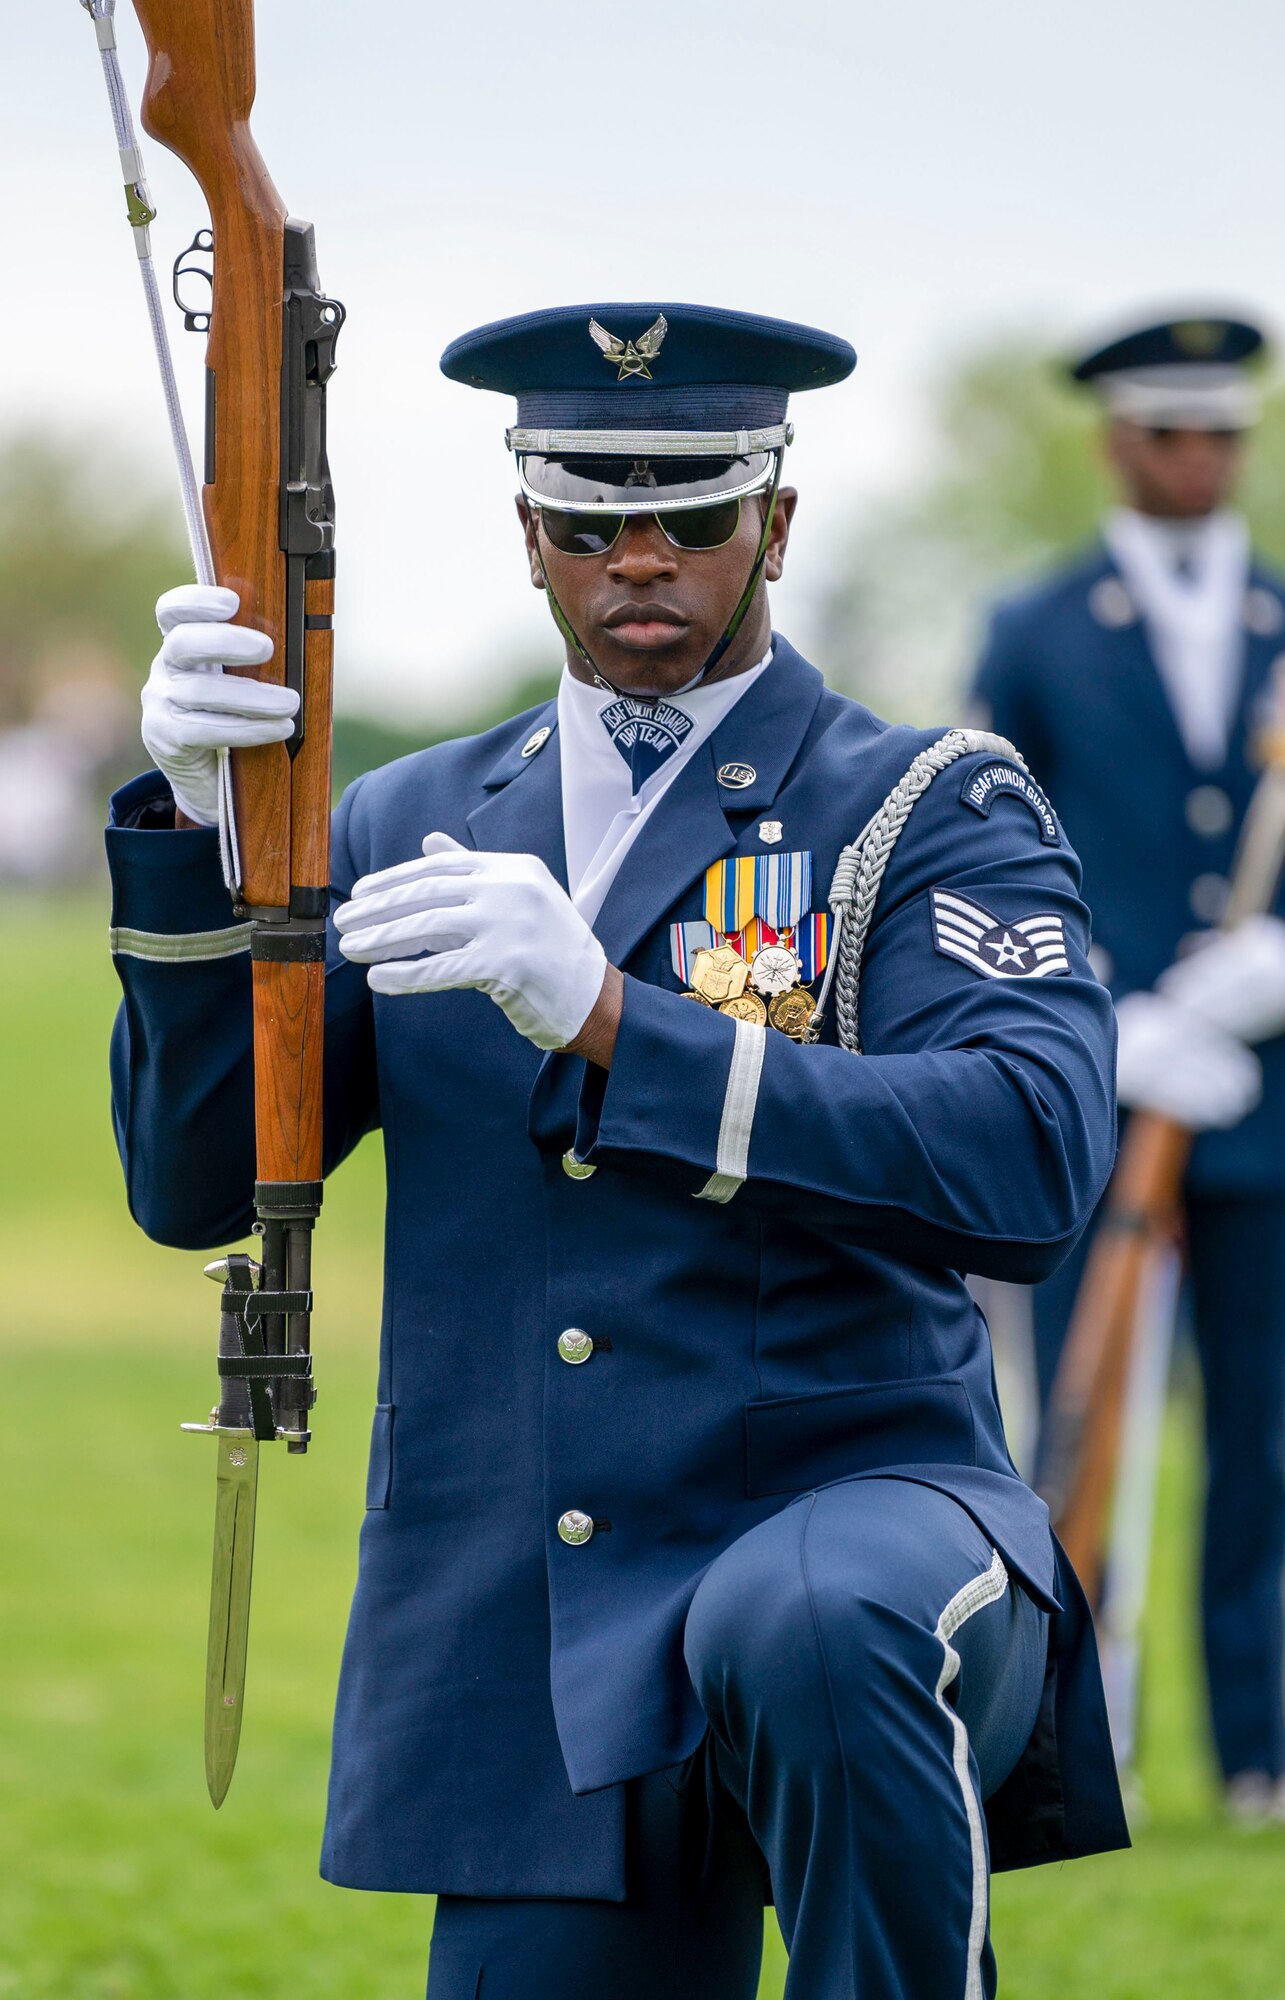 Staff Sgt. Marcus Hardy of the U.S. Air Force Honor Guard Drill Team kneels with his rifle during a performance at the Joint Services Drill Exhibition, April 14, 2023, Washington Monument, Washington, D.C. The Drill Team is an elite unit of 25 Airmen who train, on average, five days a week for eight to ten hours per day to obtain their level of mastery. (U.S. Air Force photo by 2nd Lt. Brandon DeBlanc)